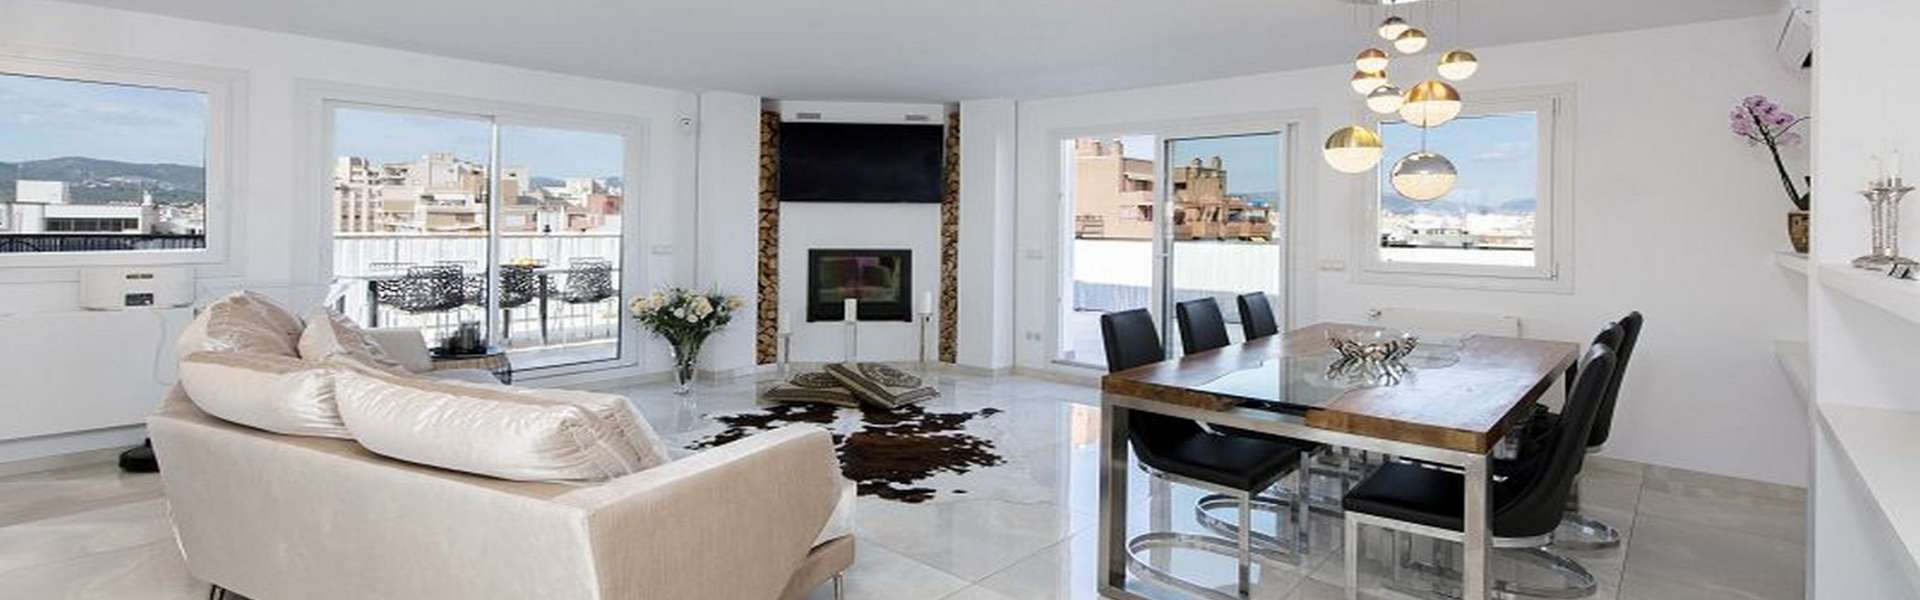 Palma/Old Town - Penthouse with view to the cathedral, the sea and the harbor